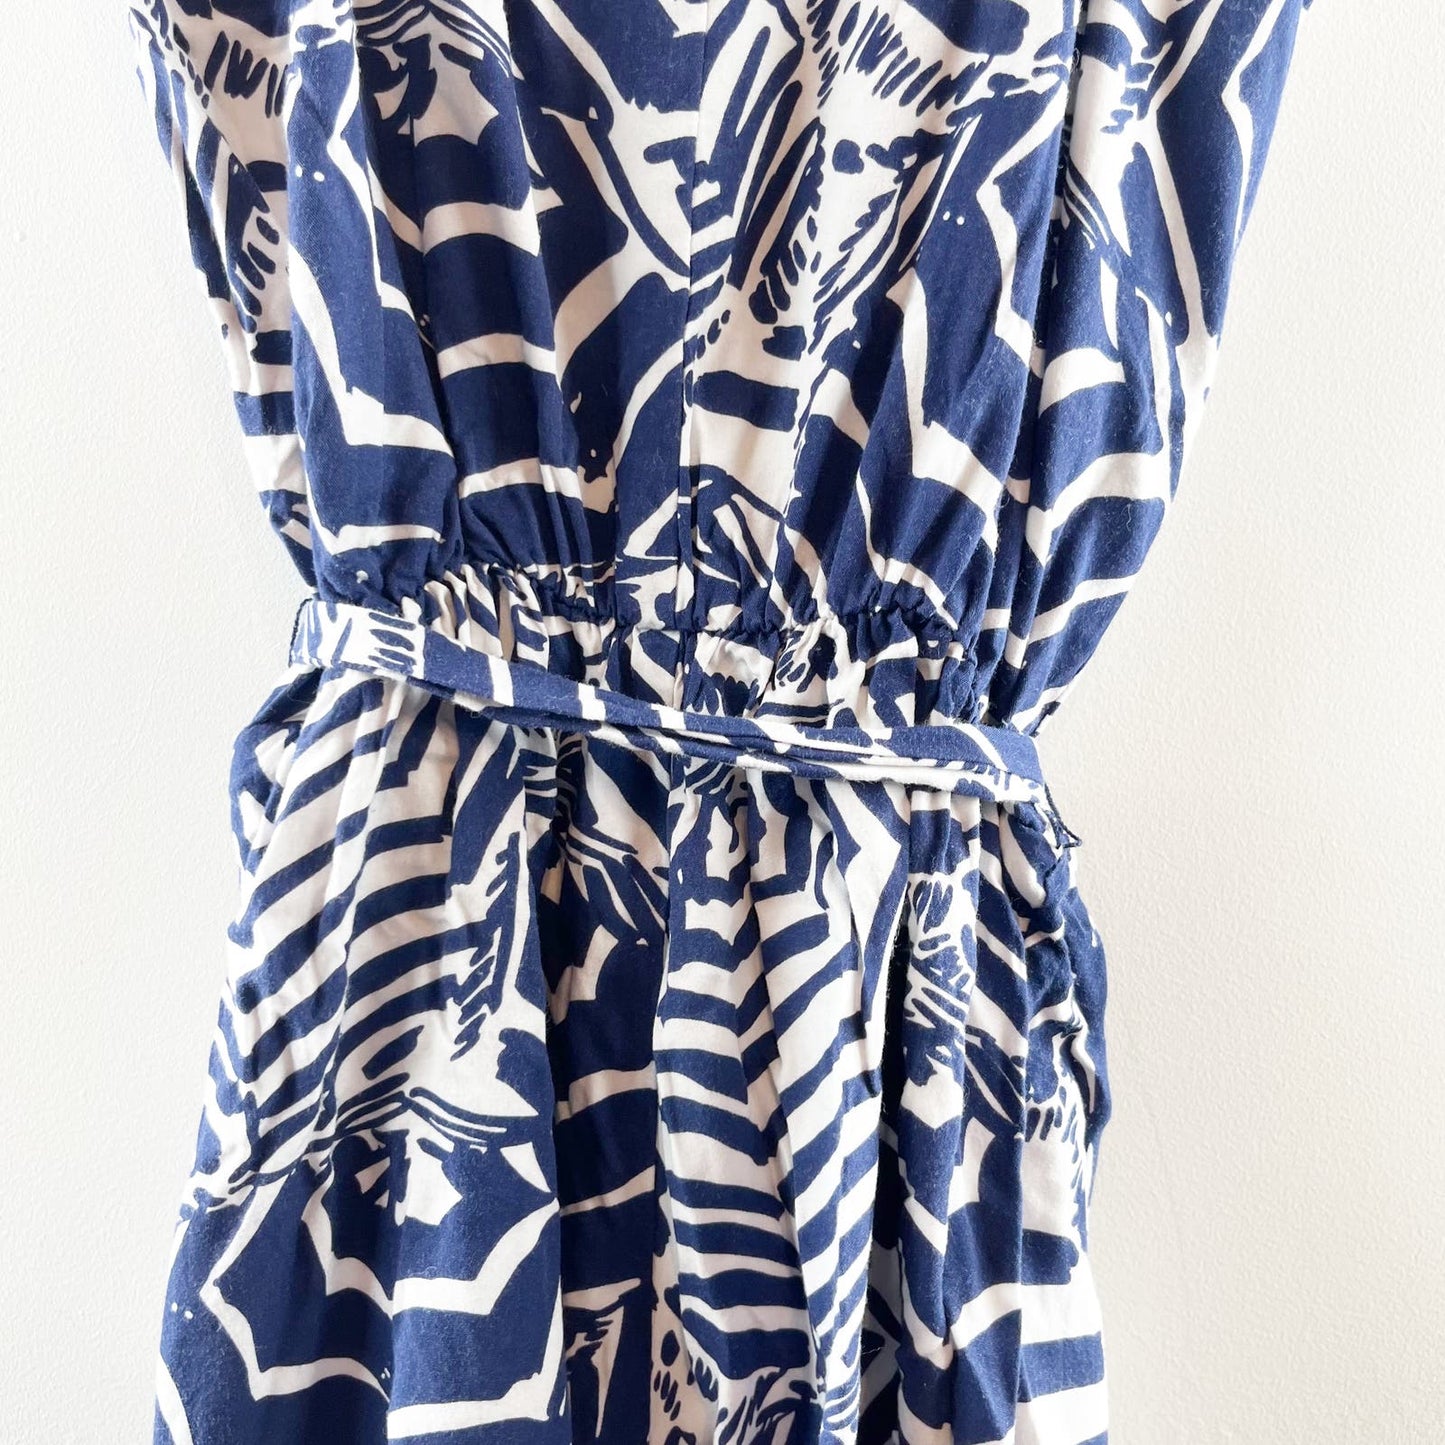 Lilly Pulitzer Deanna Oh Cabana Boy Print Belted Romper Blue And White Medium